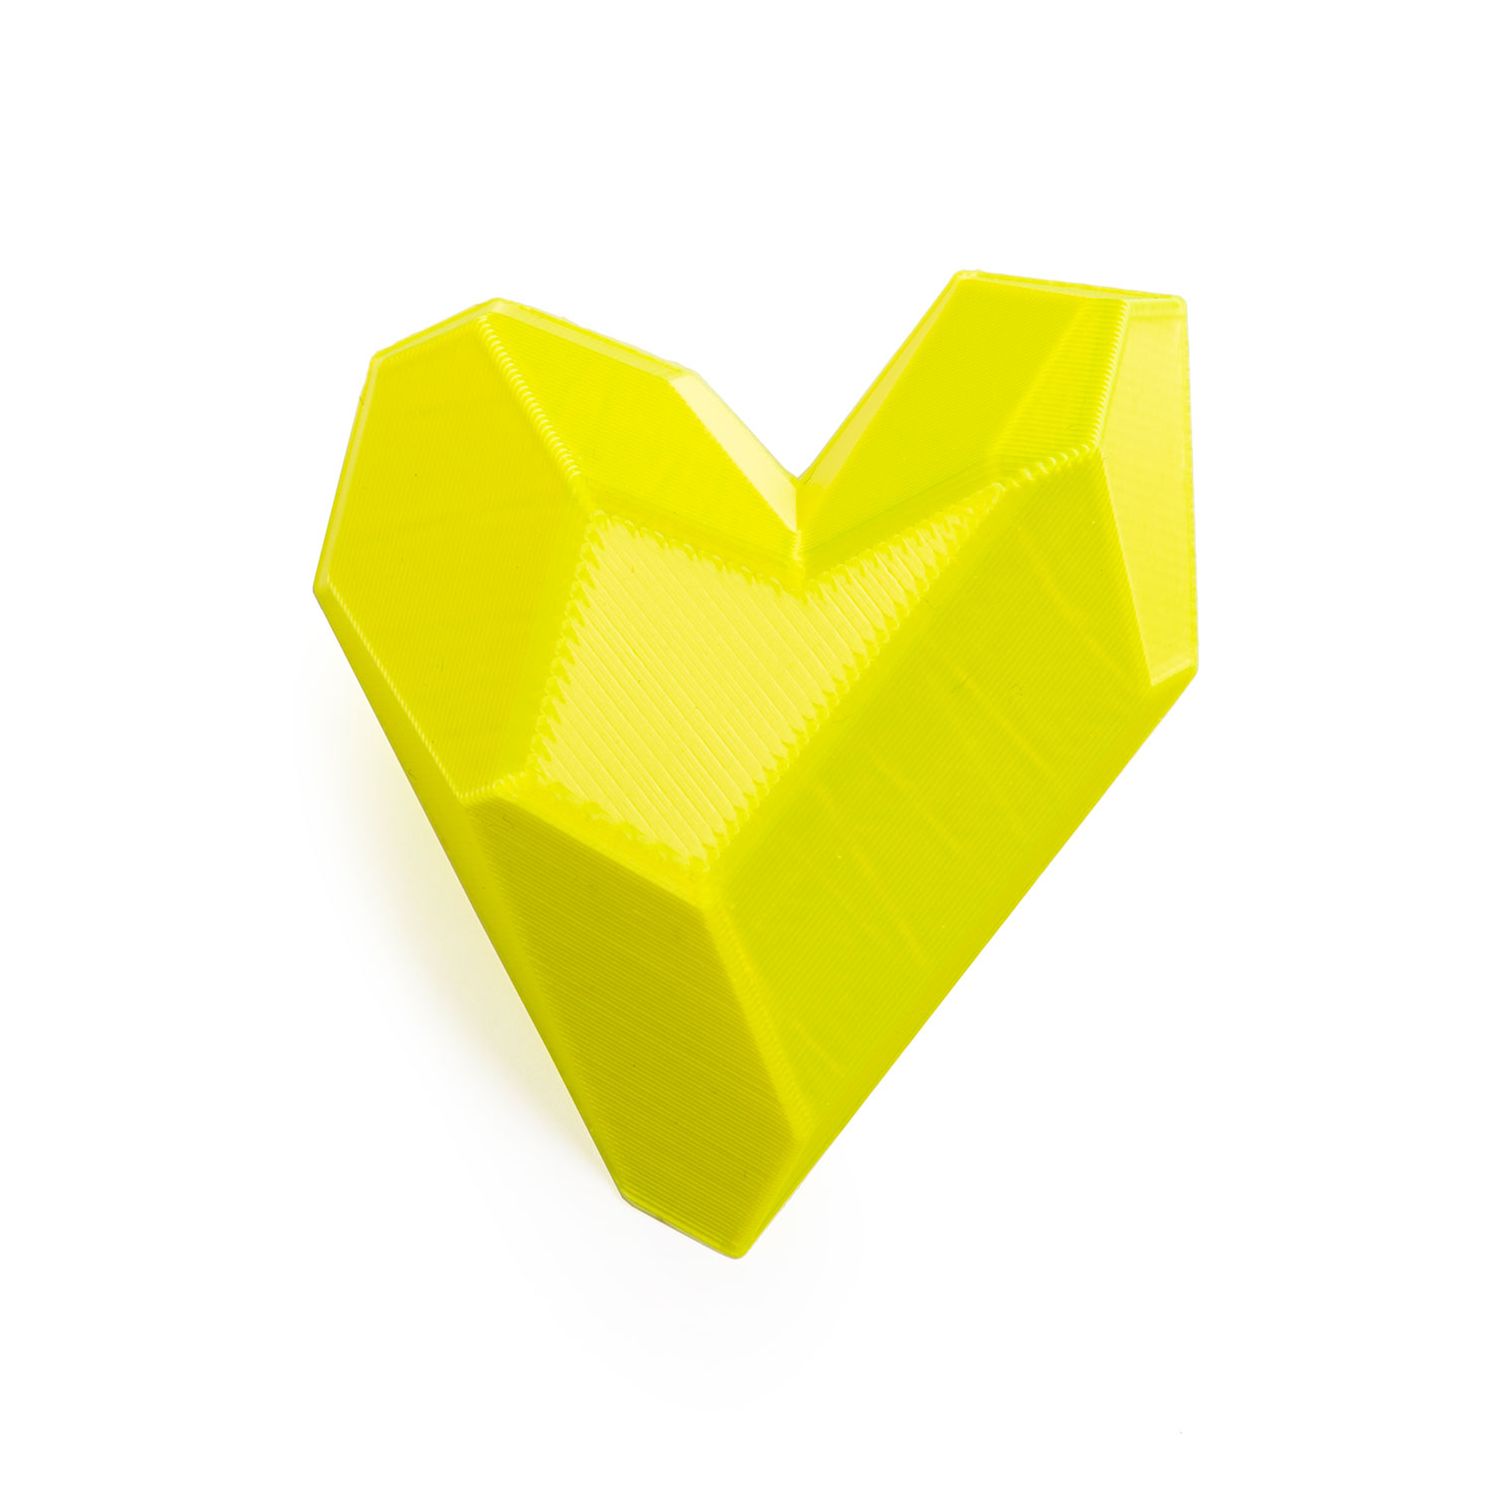 Maison 203: Mini Heart Brooch – Fluorescent Yellow Product Image 1 of 3